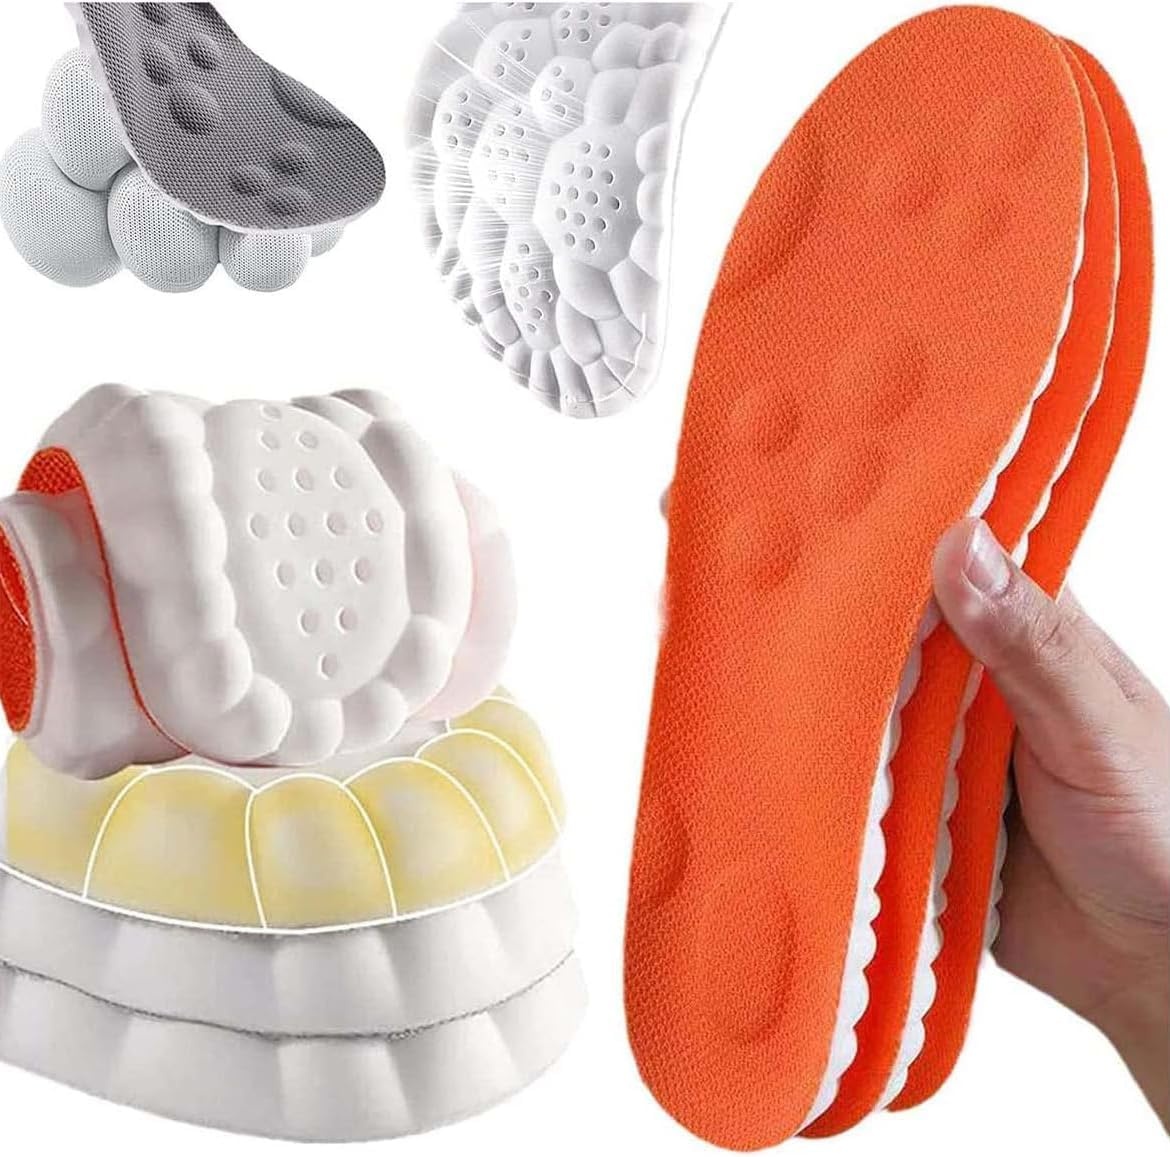 4D Insoles-4D Cloud Technology Insole,Metatarsal Orthotic Insoles Arch Supports Inserts, High-Elastic Shock-Absorbing Insoles,Plantar Fasciitis, Ball of Foot Pain Relief (37-38, orange)